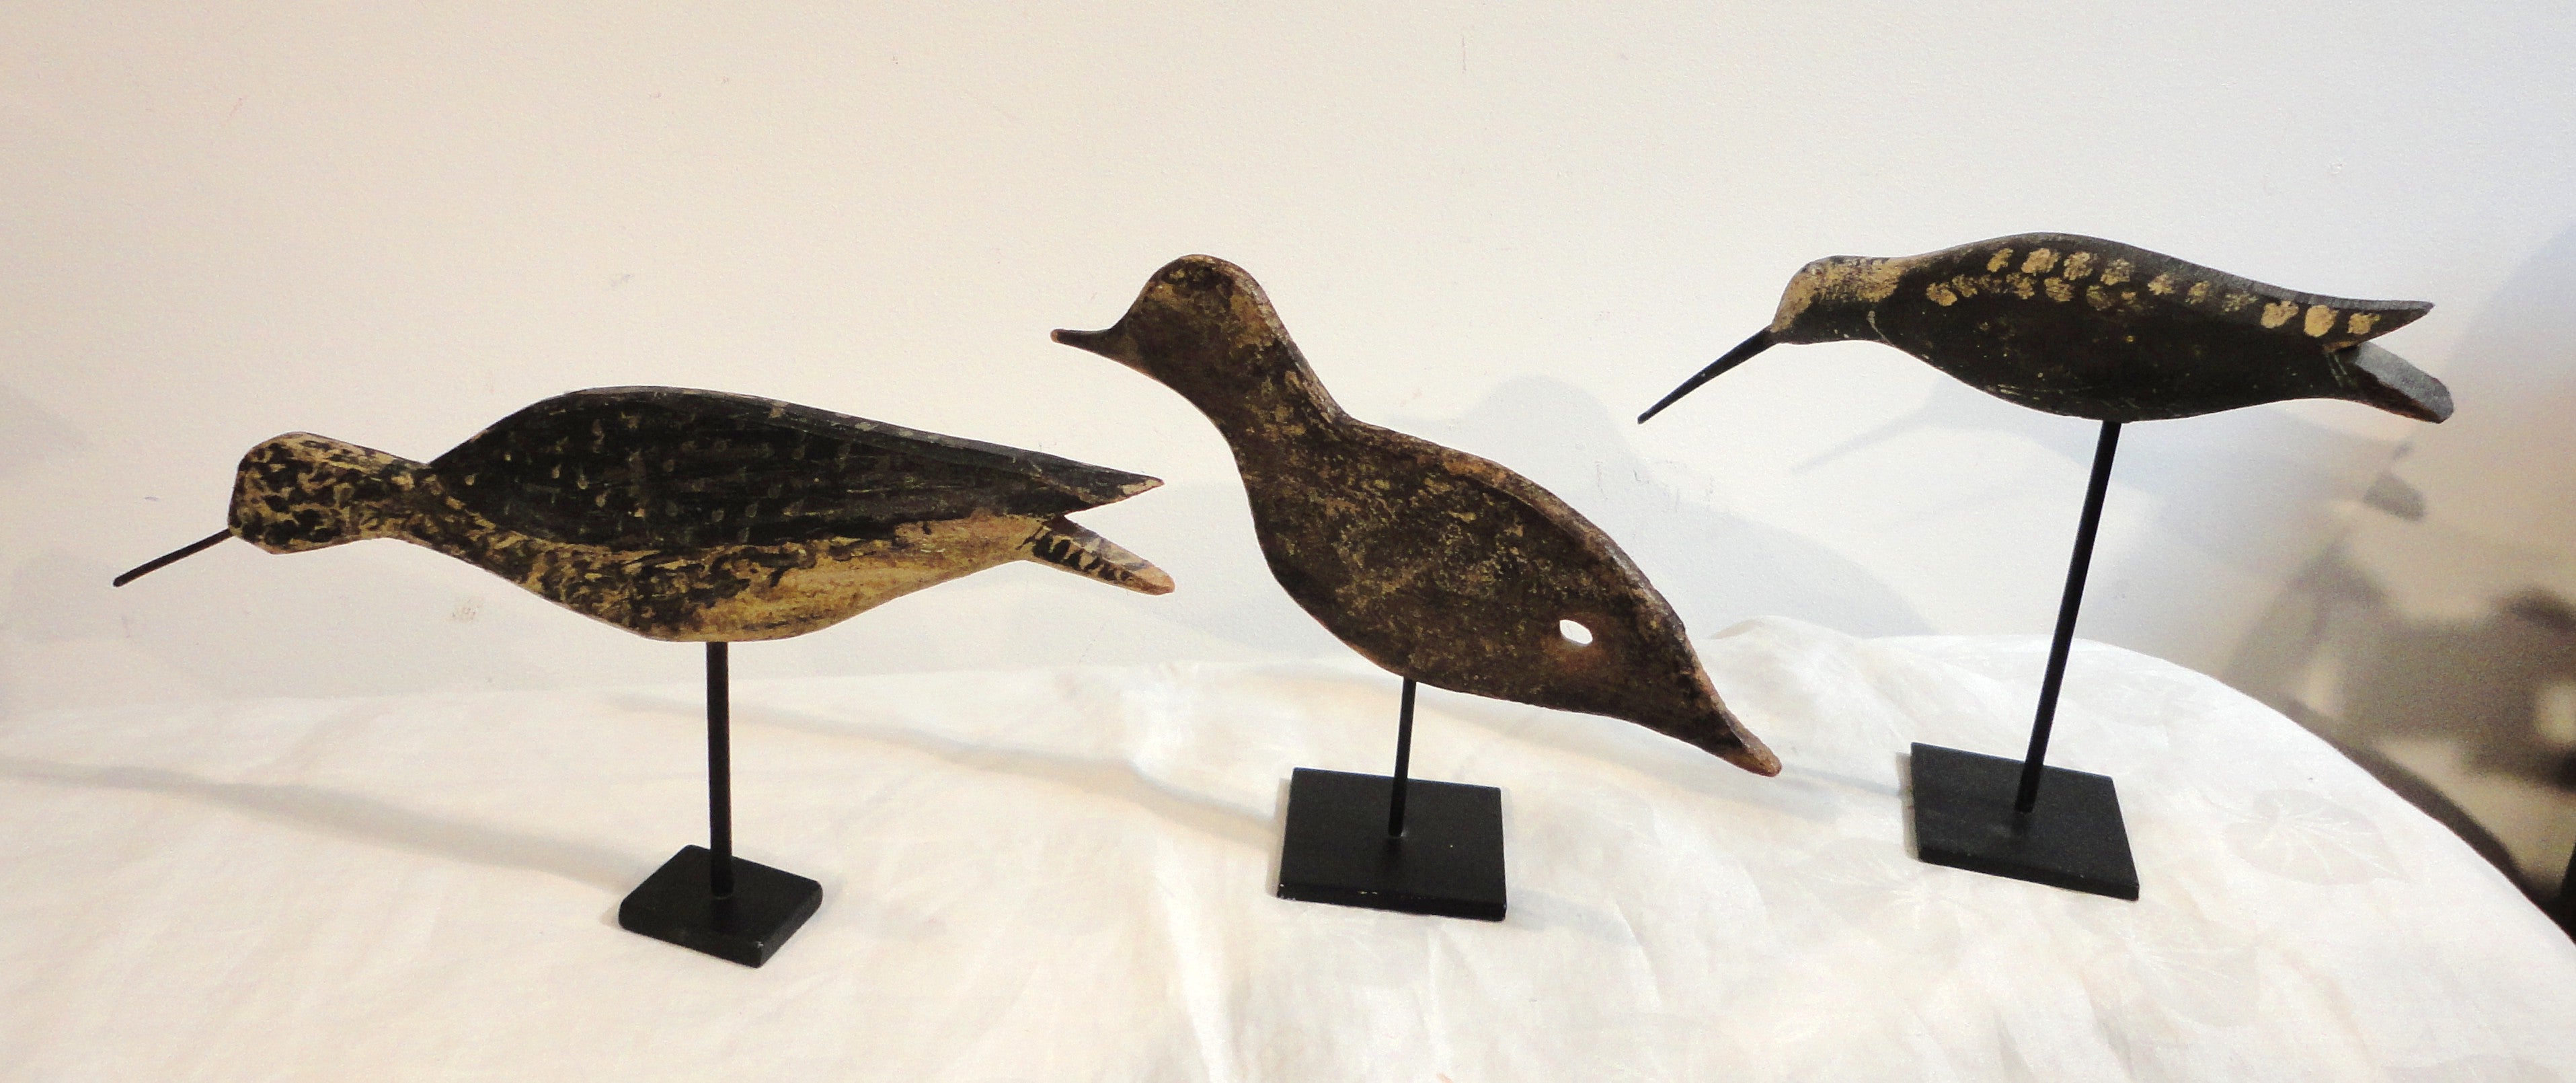 Fantastic Group of 3 Shorebirds in Original Painted Surface